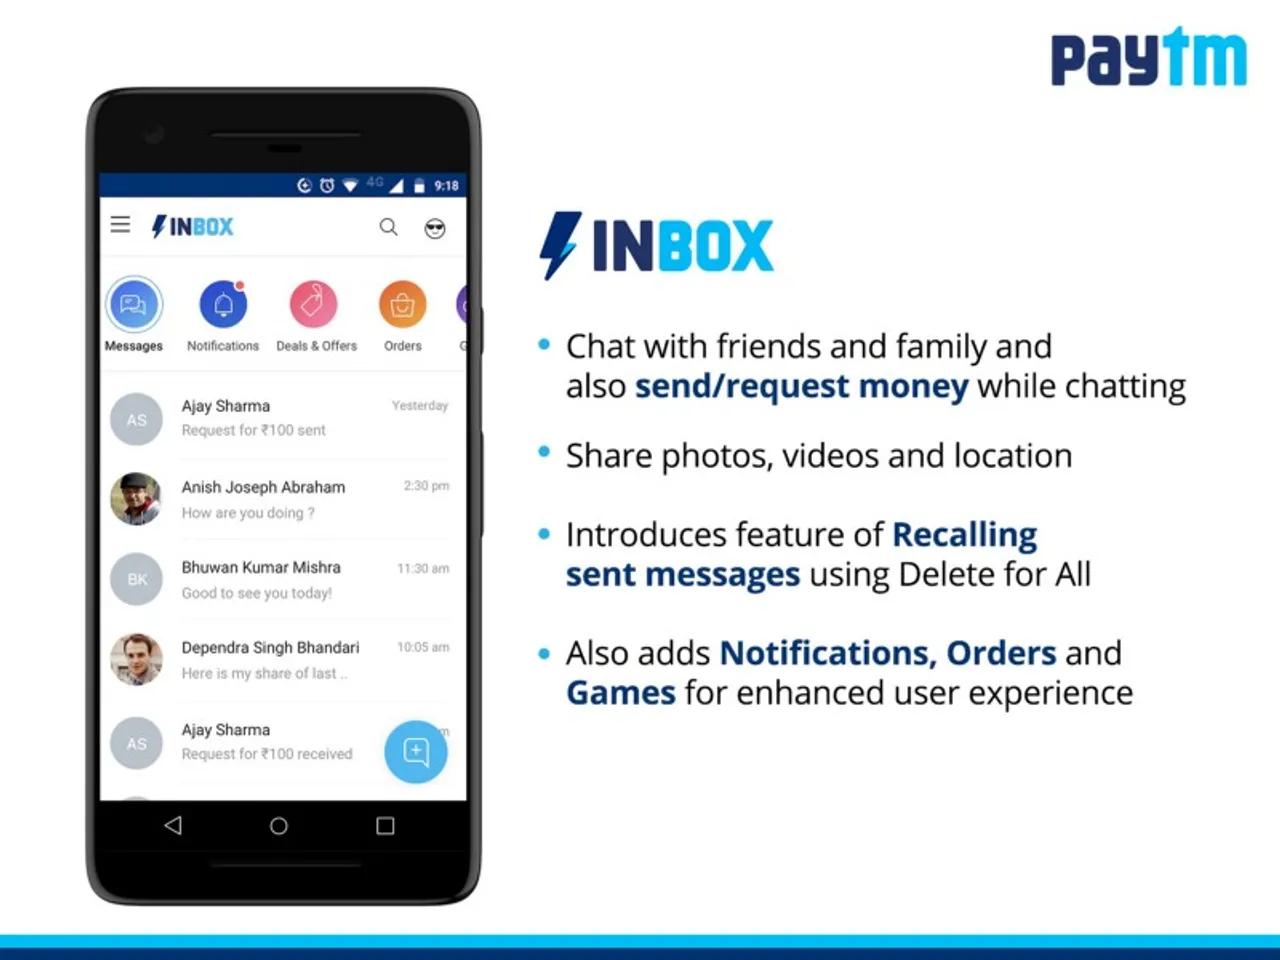 Paytm introduces in-app messaging feature 'Inbox'